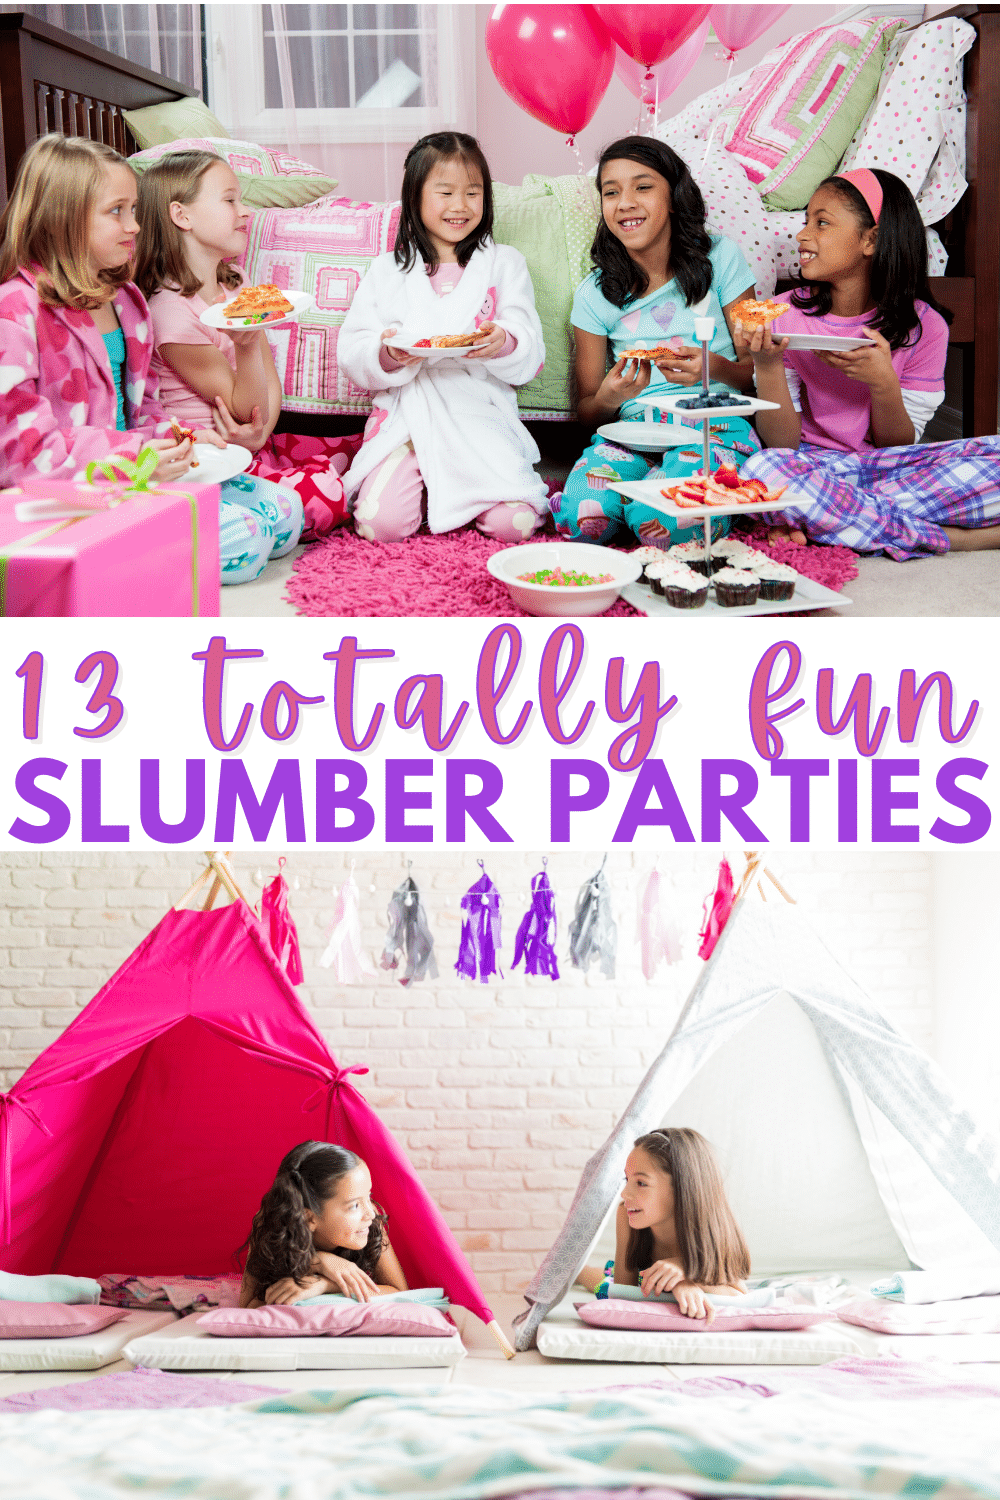 Really fun slumber party ideas to turn any sleepover into a night to remember! Choose one theme or combine several for a variety-filled evening. So many good suggestions! #sleepover #slumberparty #birthdays via @wondermomwannab